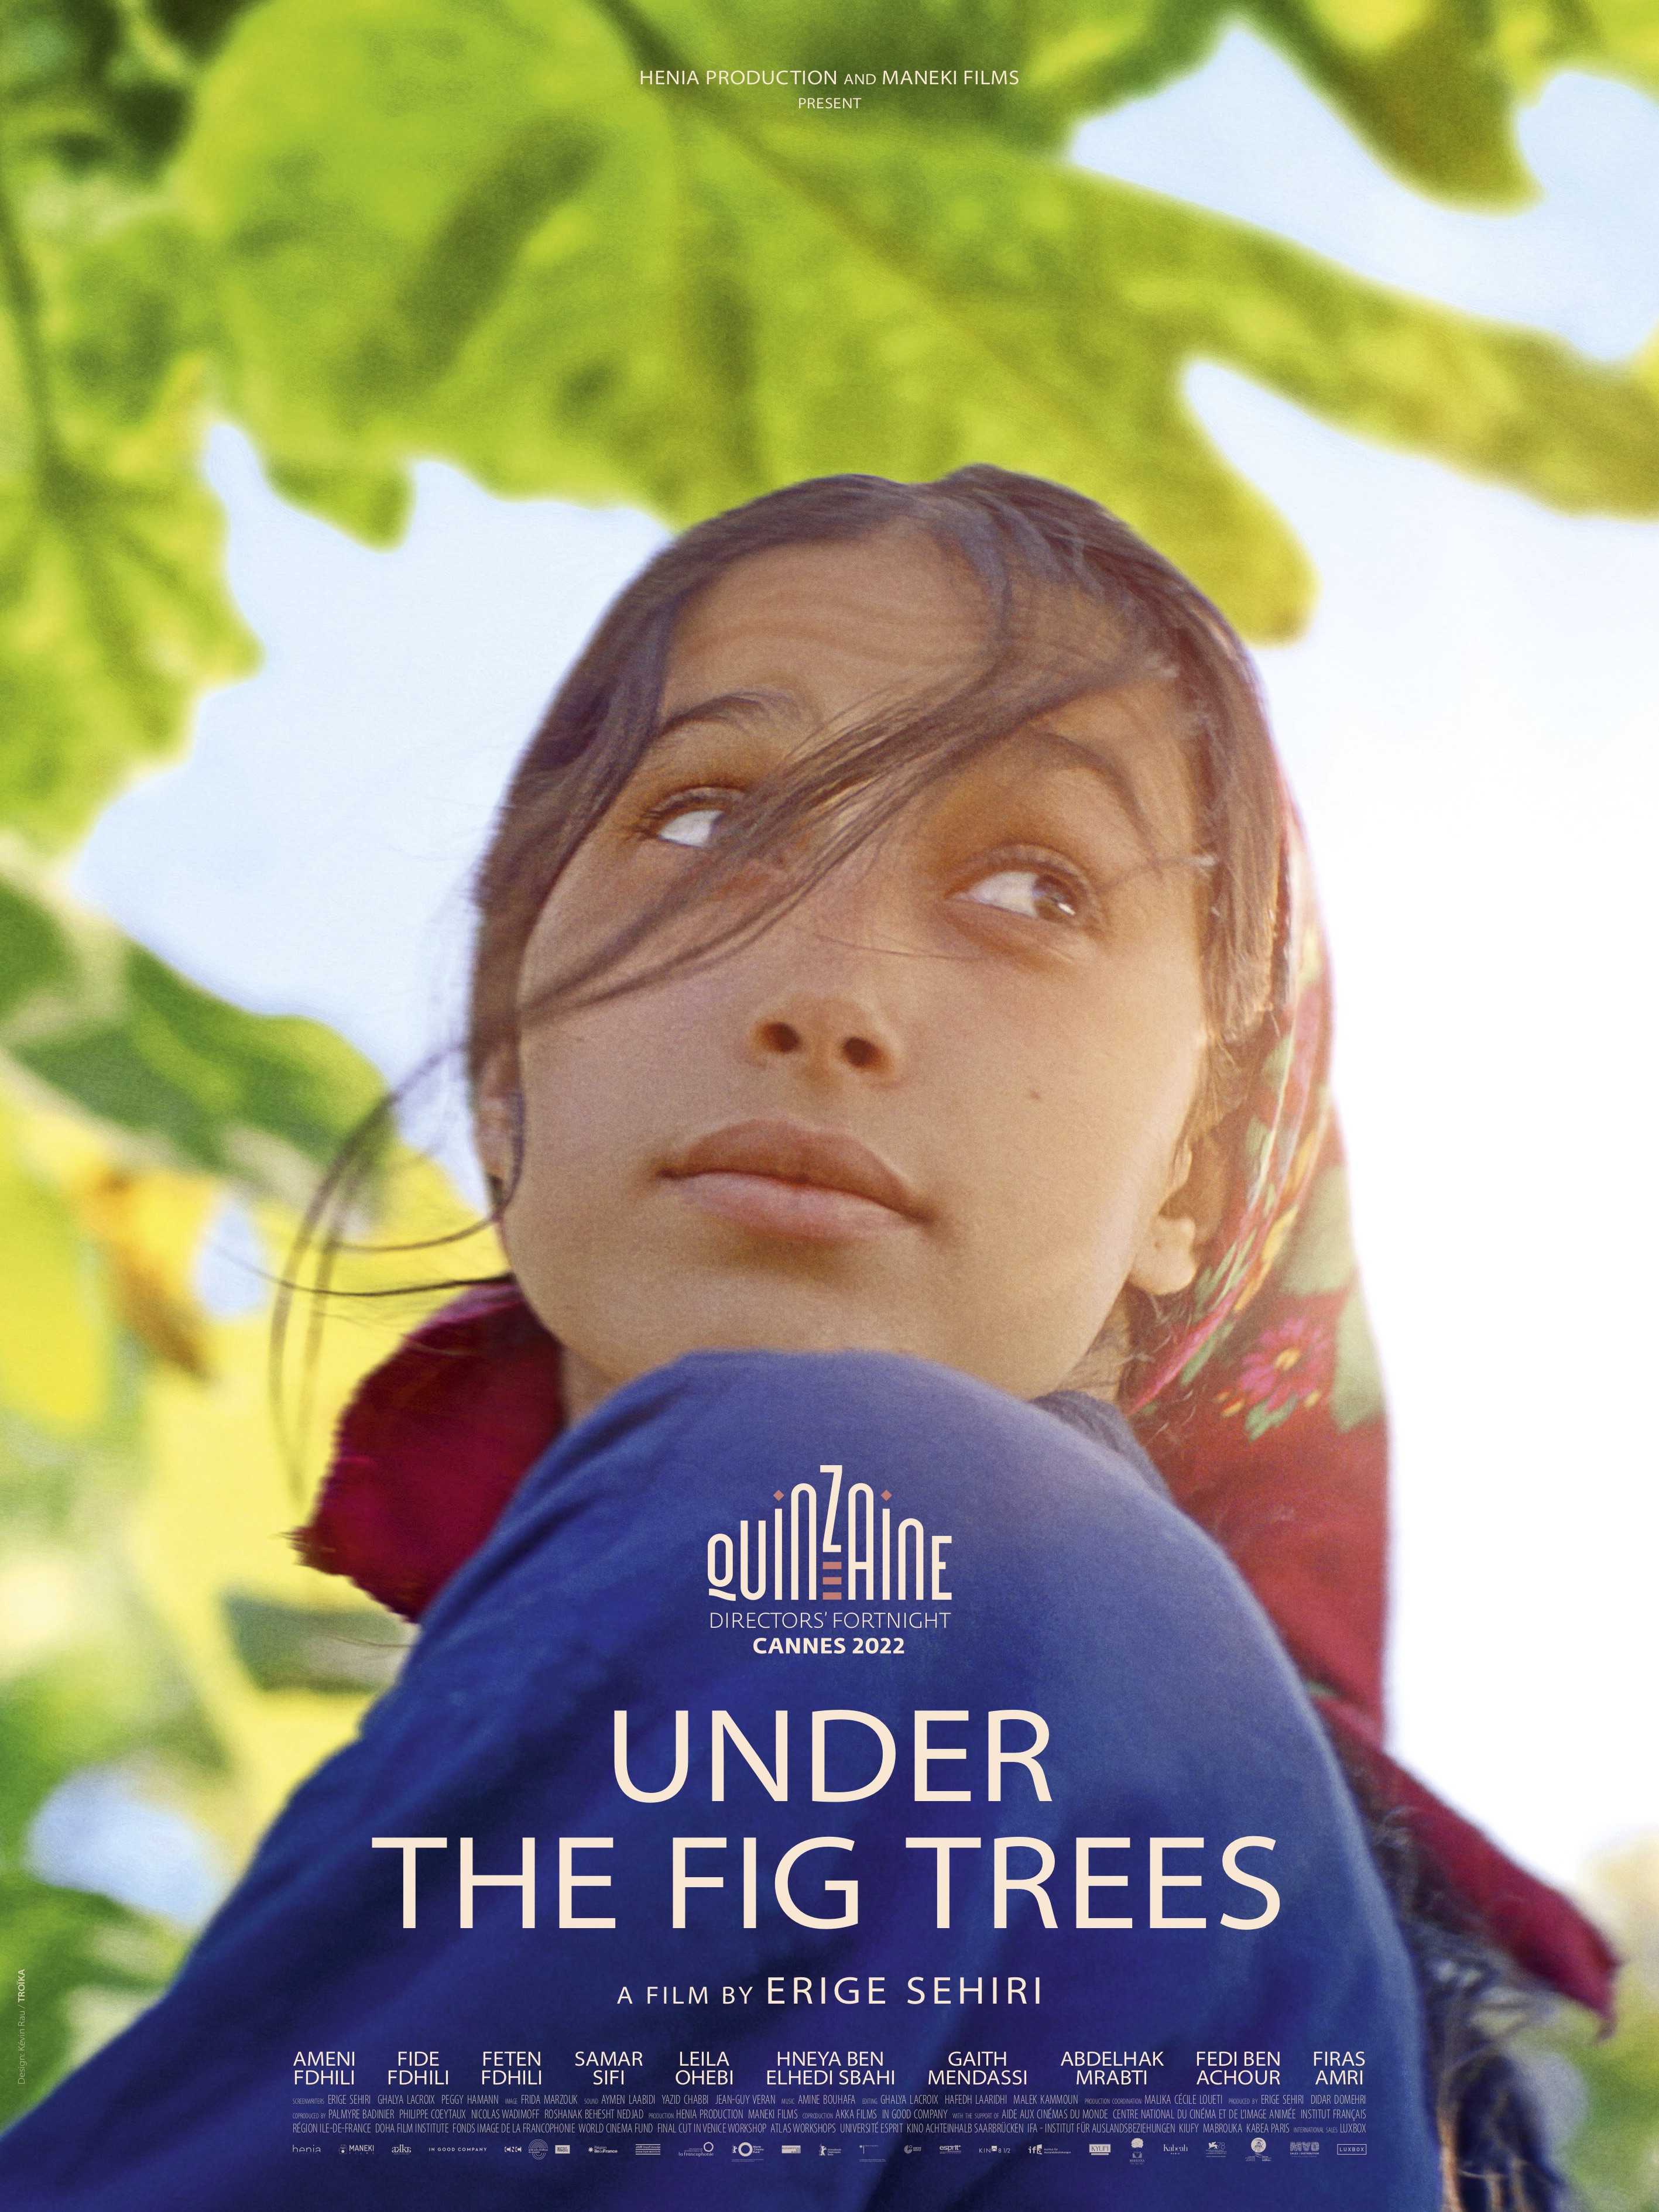 "Under The Fig Trees" film poster (distributed by MAD Distribution)